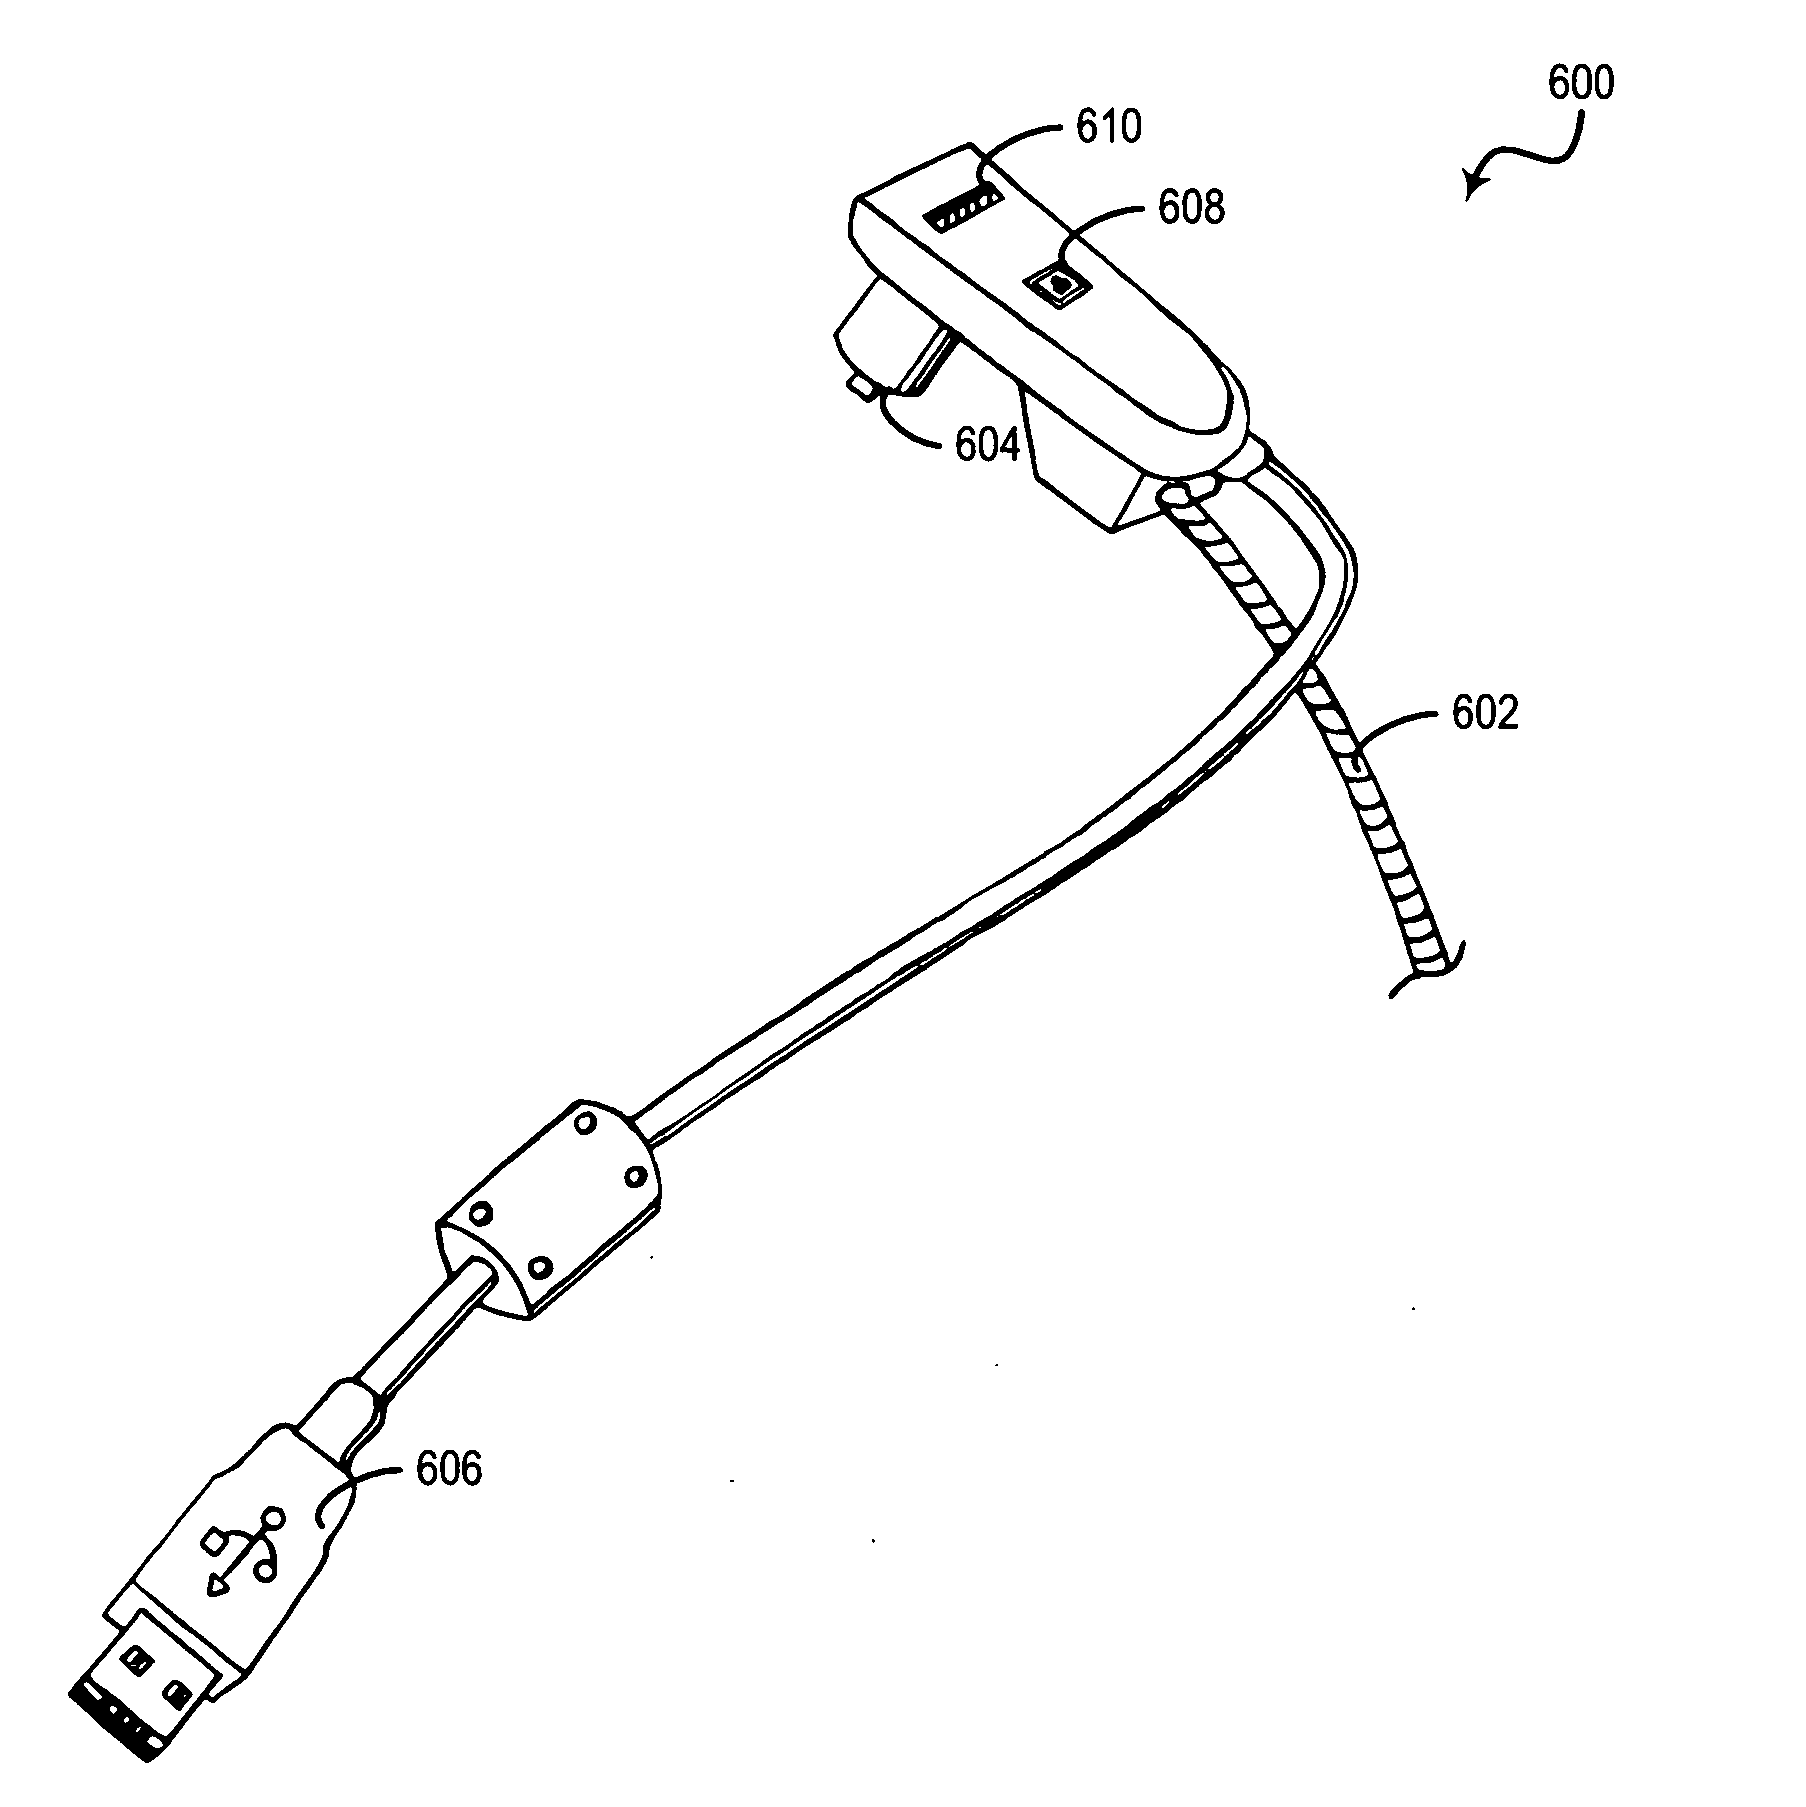 System and method for equipment security cable lock interface